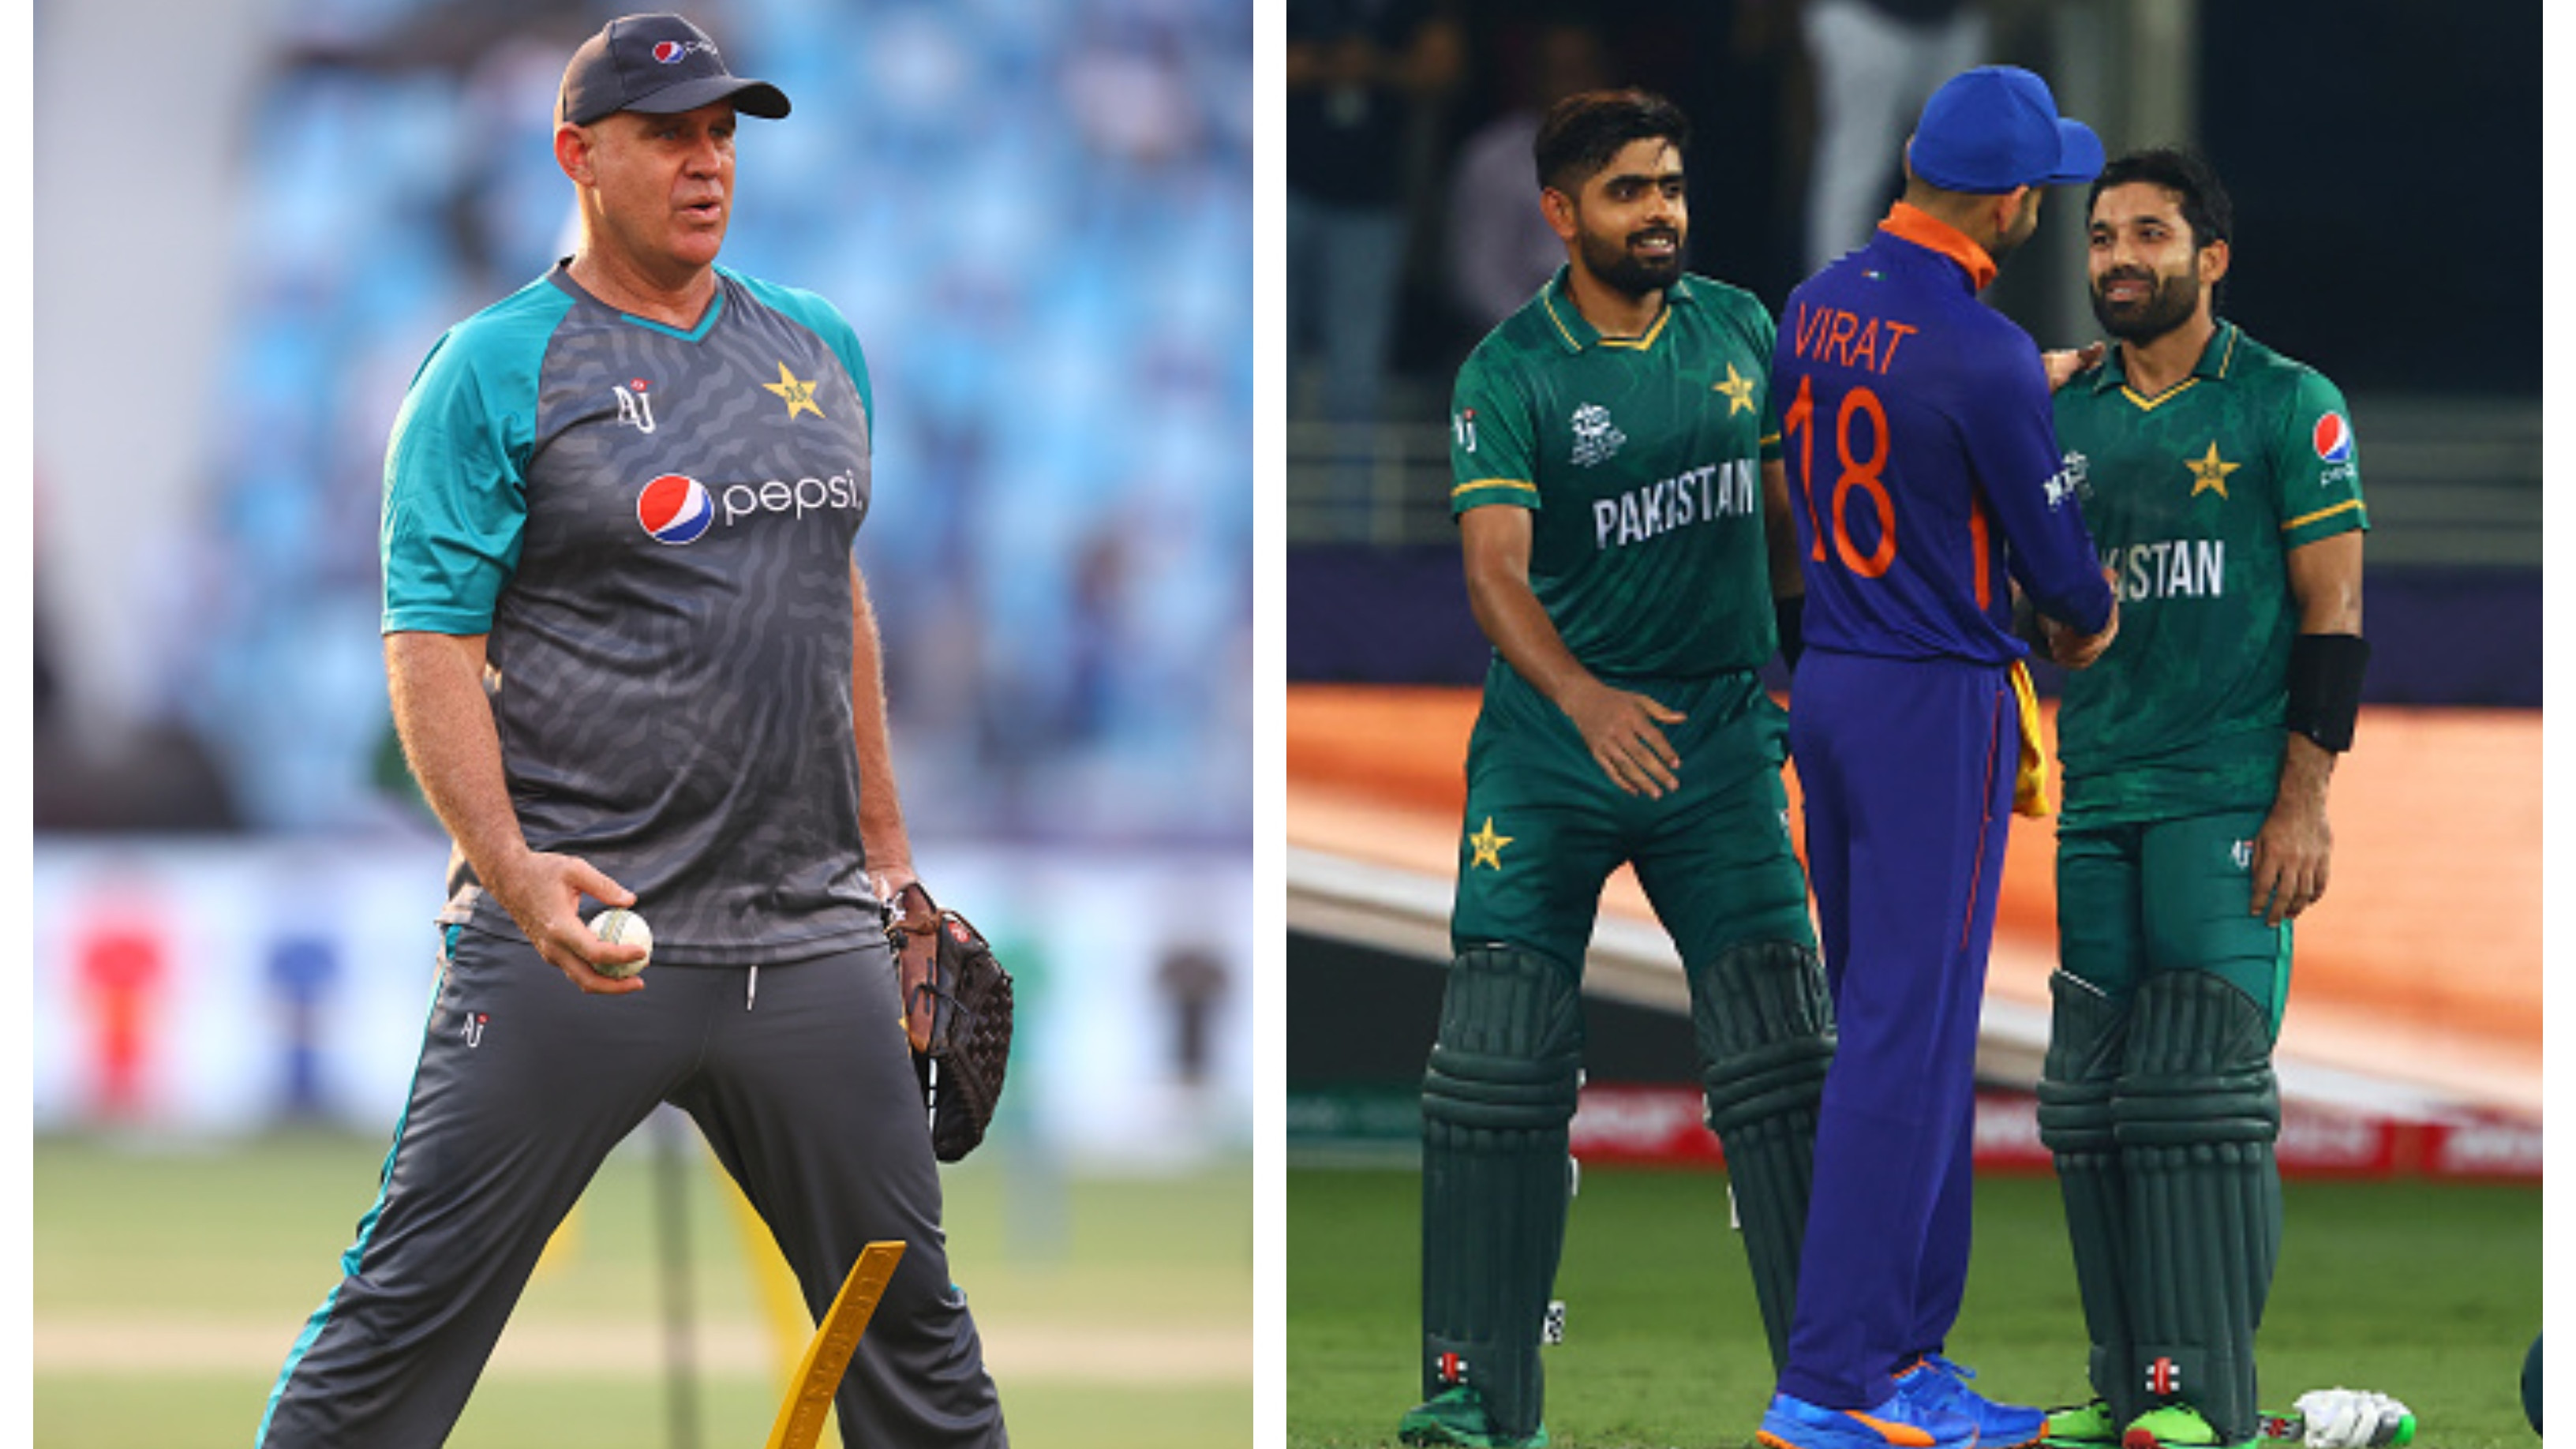 T20 World Cup 2021: Win against India set the tone for Pakistan, says Matthew Hayden ahead of semi-final